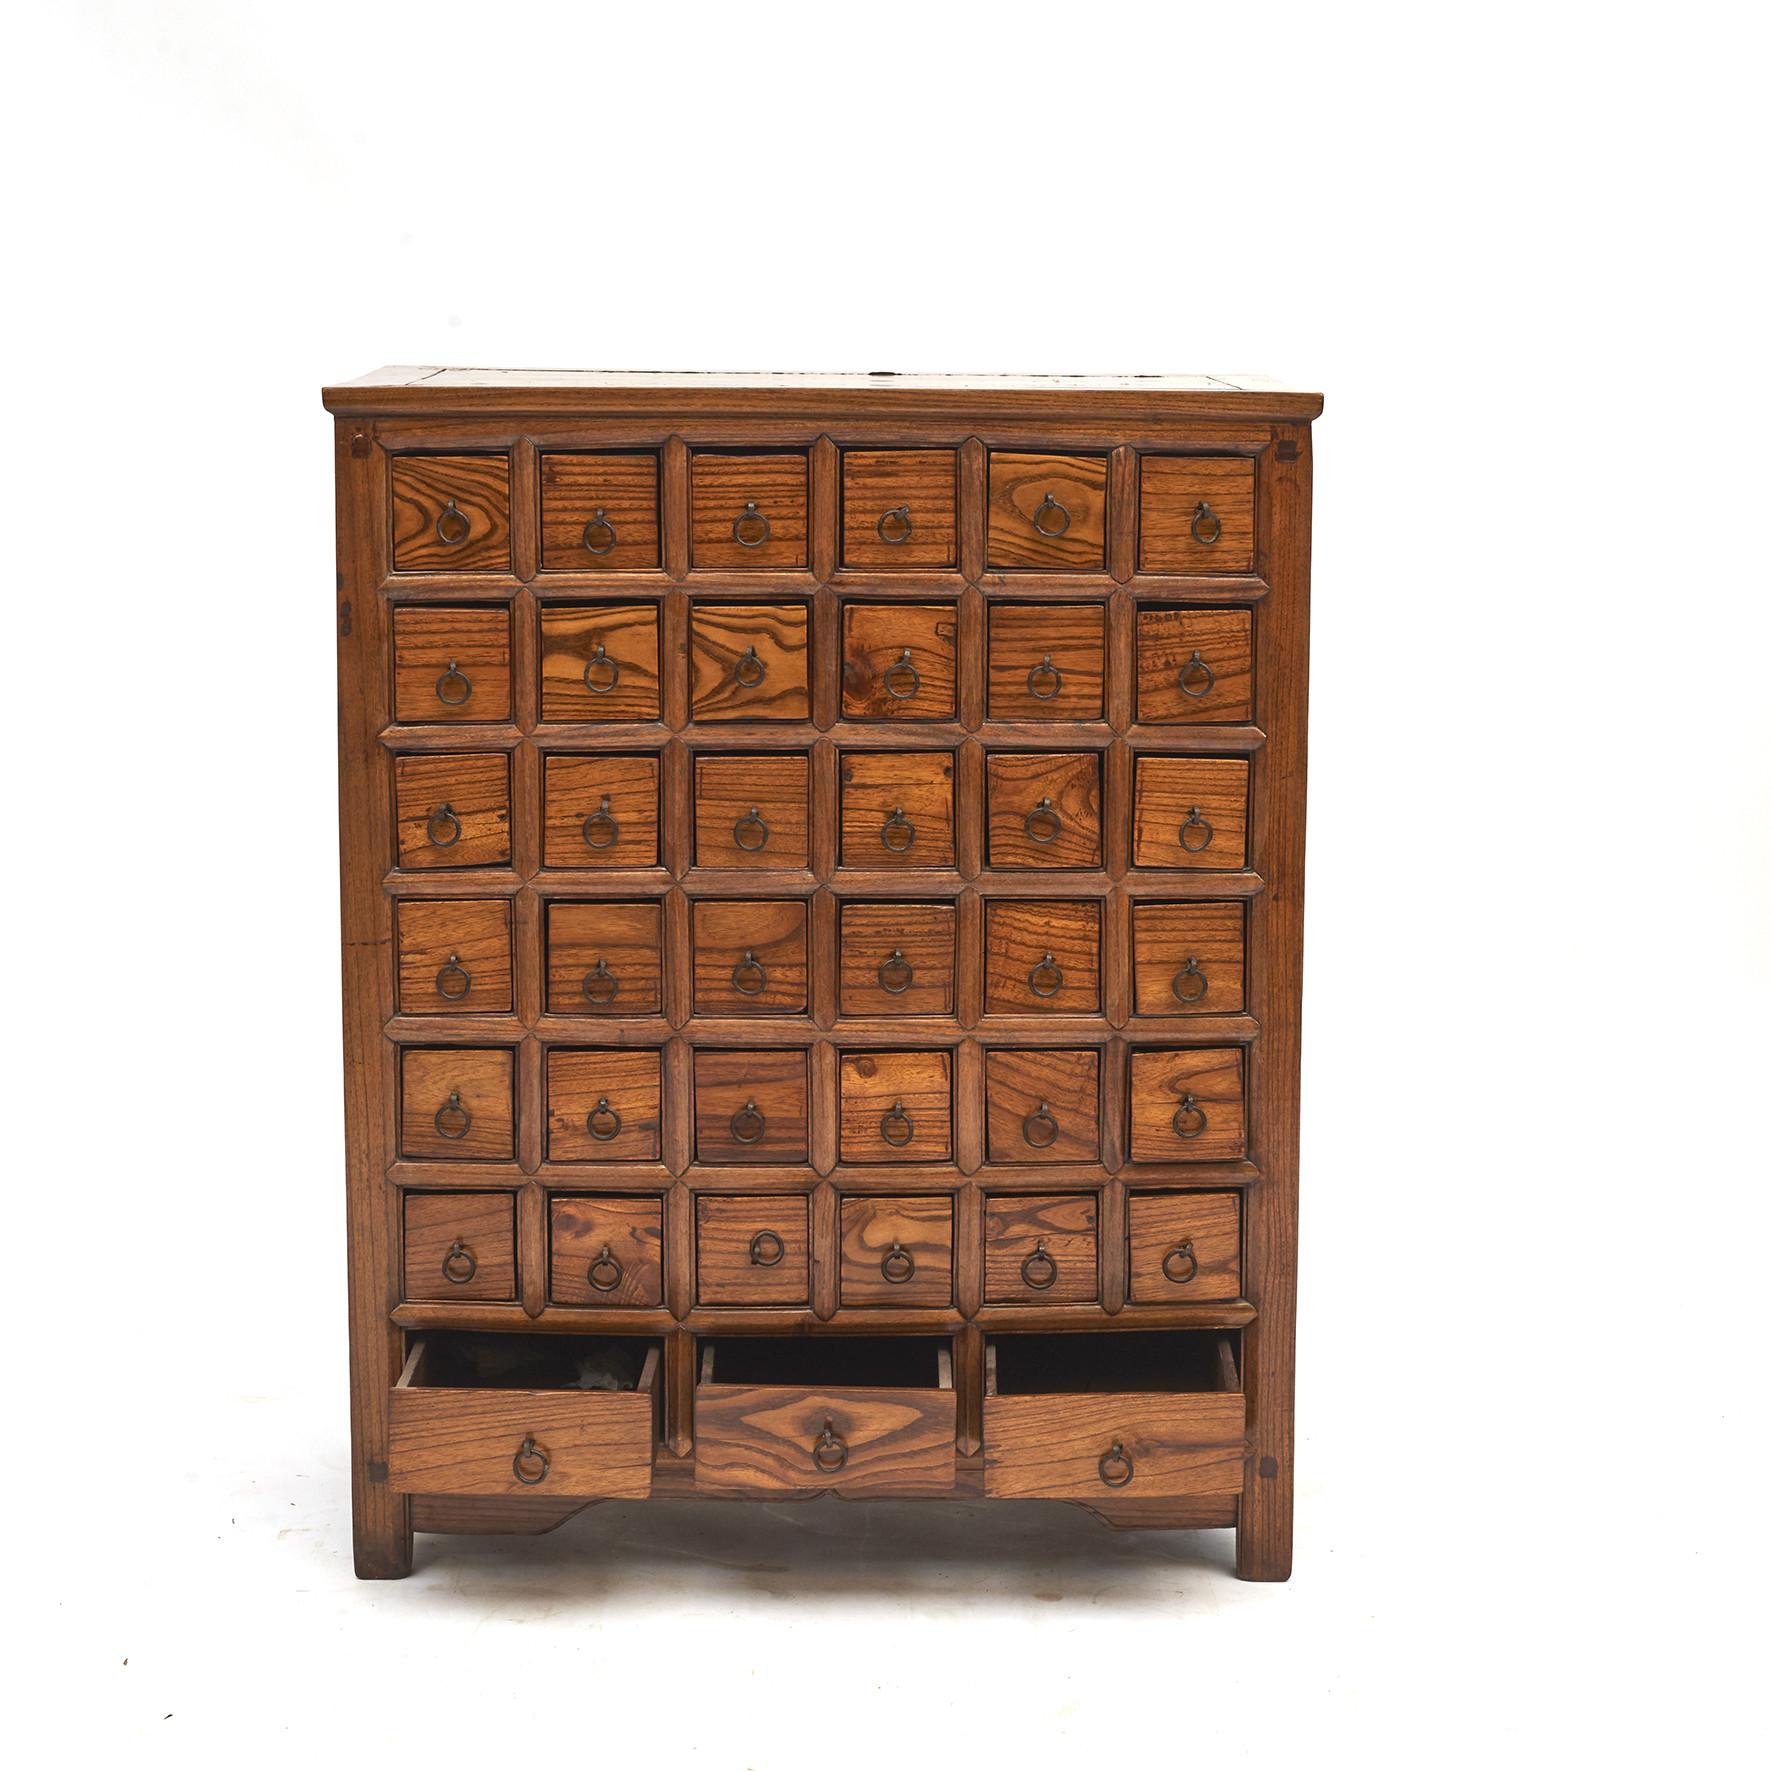 Qing Chinese Apothecary Medicine Chest with 39 Drawers